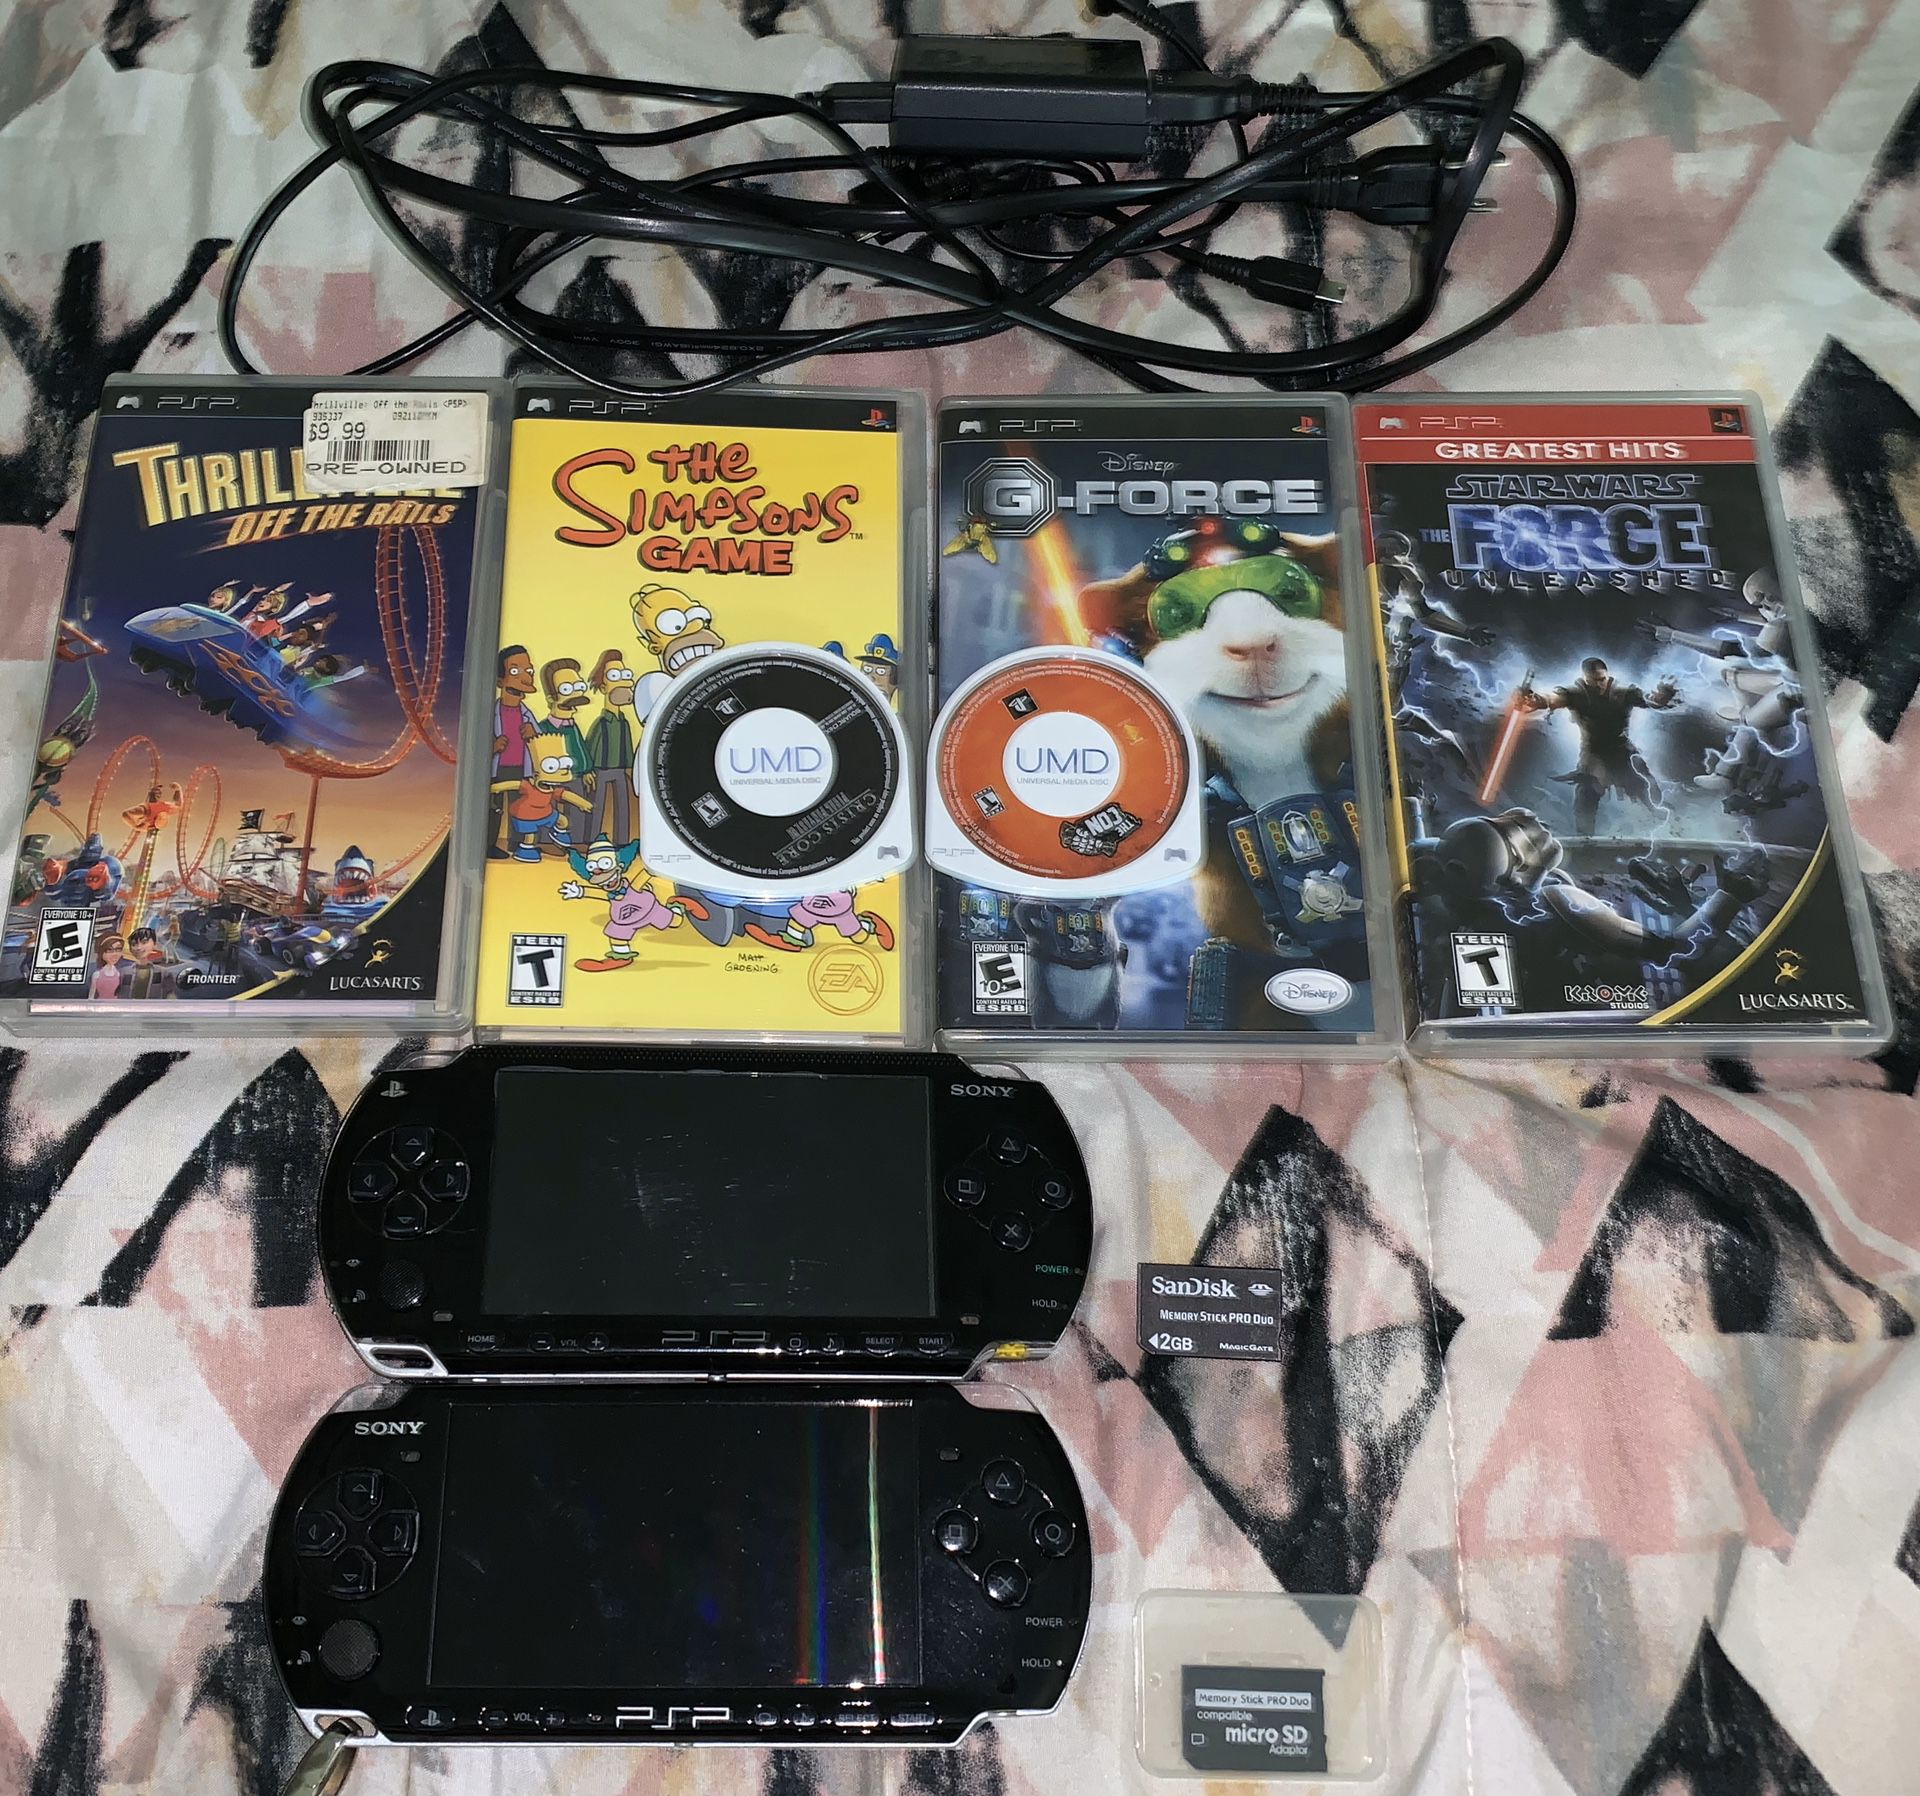 2 PSP’s w/ 6 games + charger + memory cards